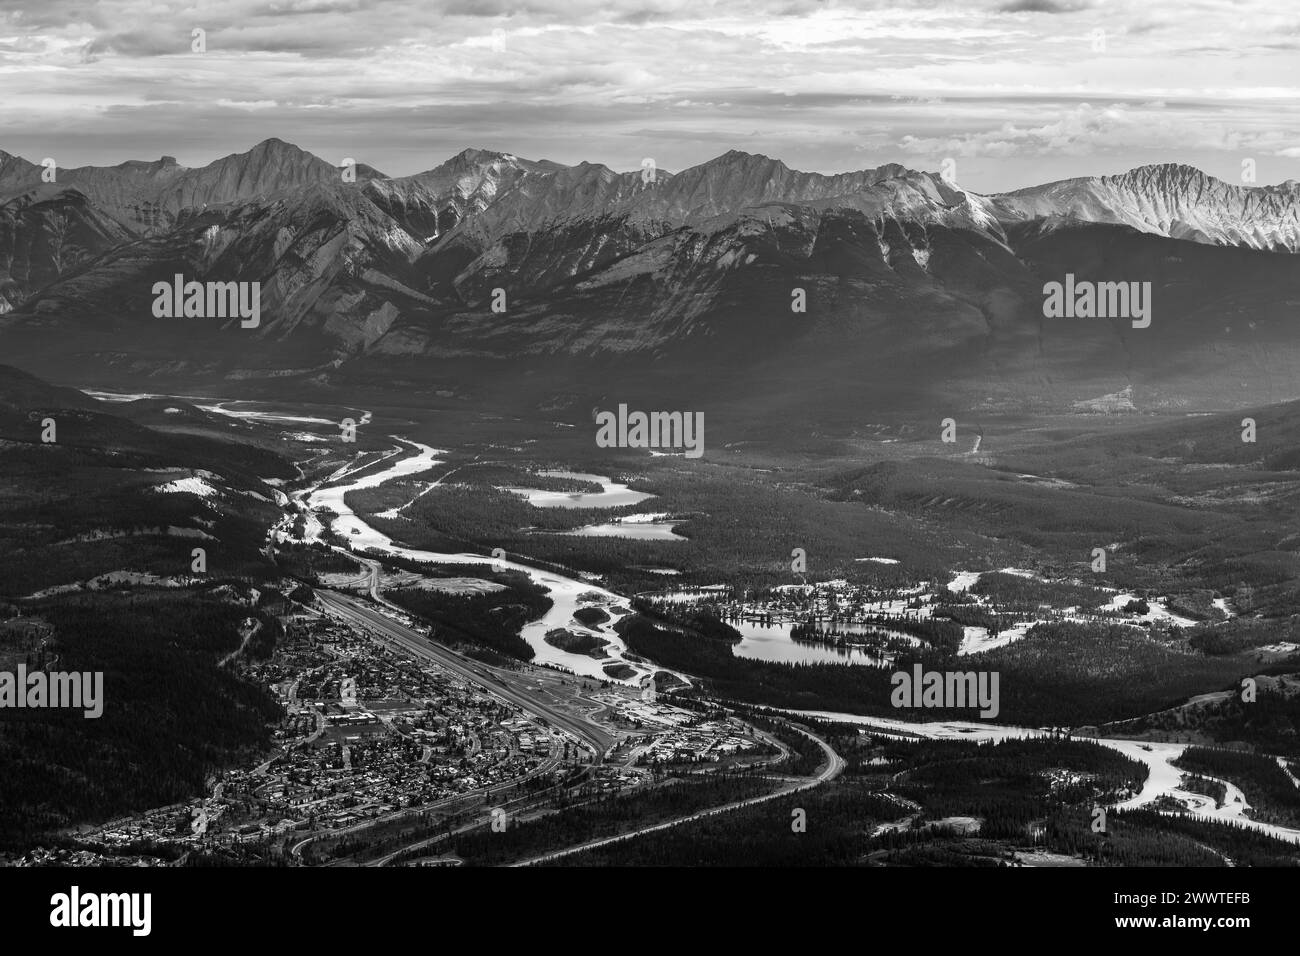 Jasper Town and Athabasca River aerial view in black and white, Jasper national park, Canada. Stock Photo